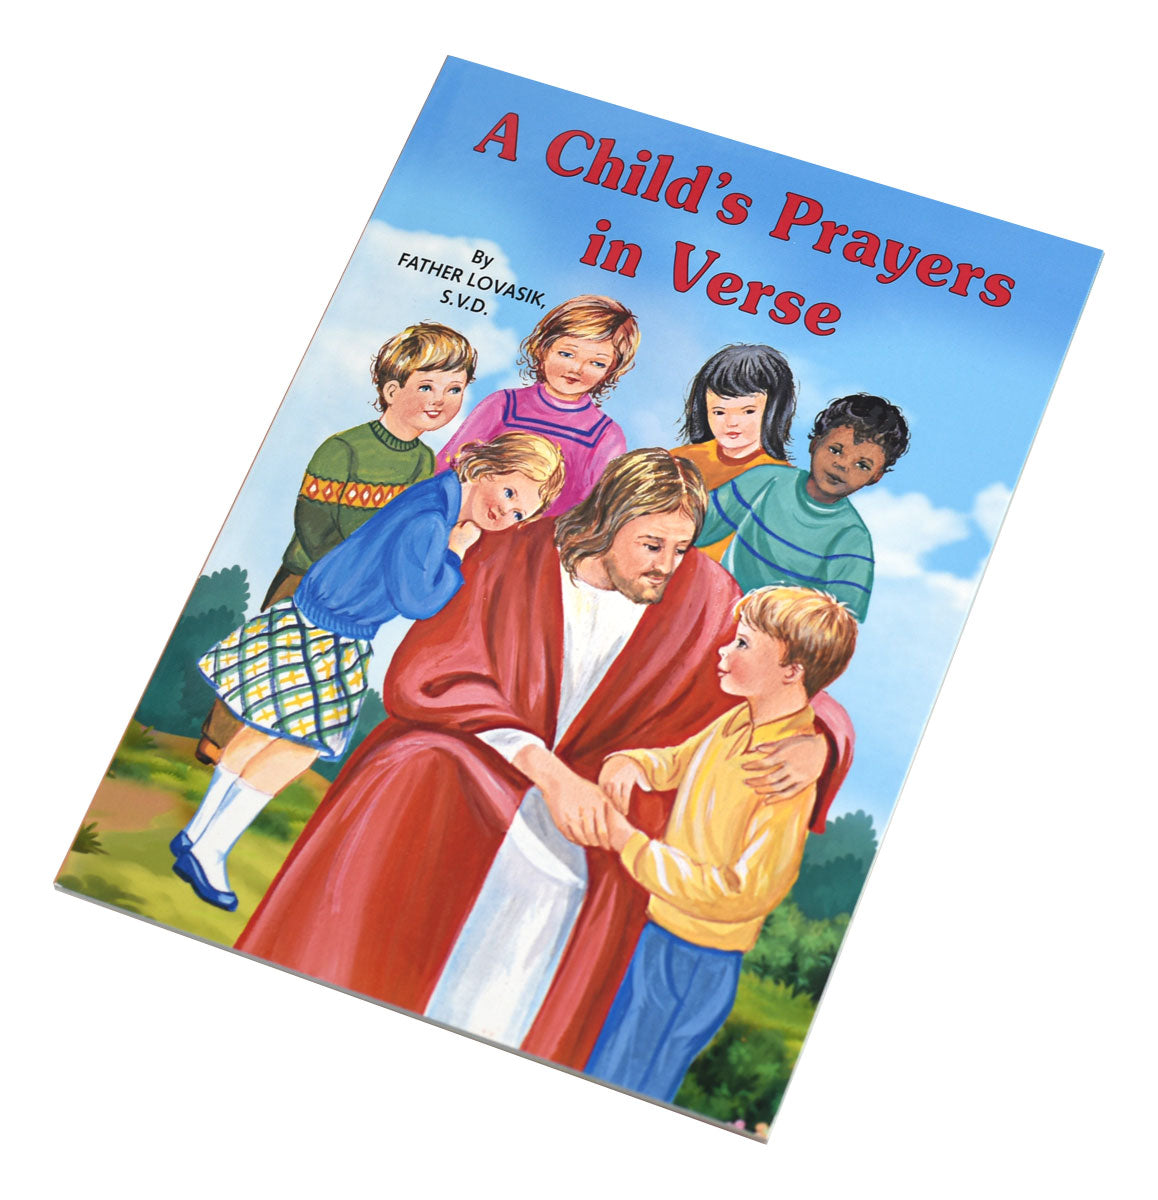 A Child's Prayers In Verse